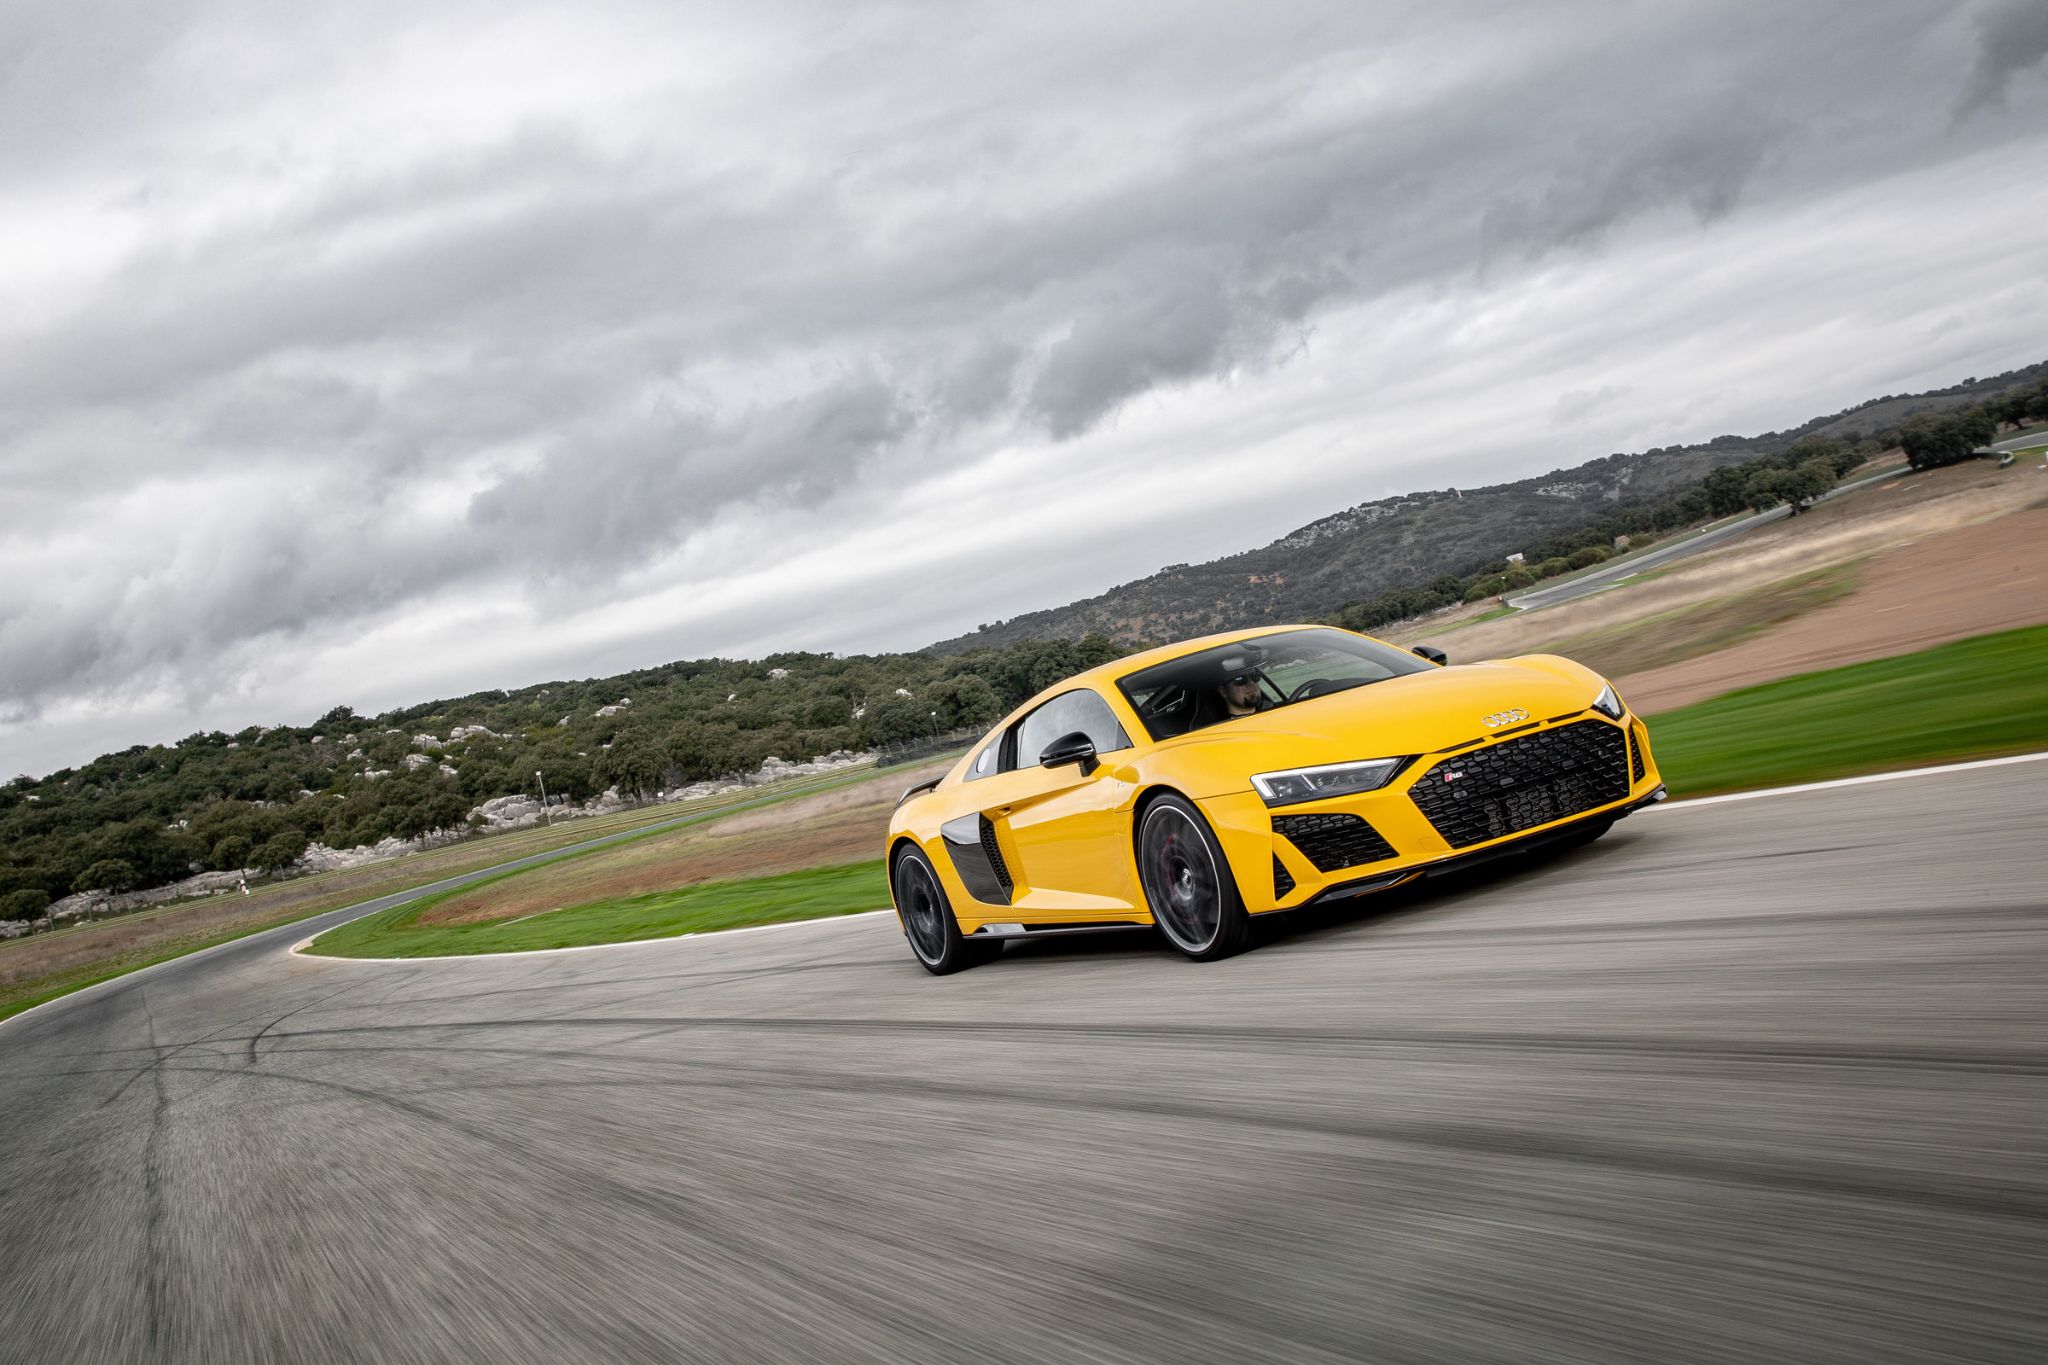 Audi R8 V10 Performance - Back and Better than Before - Xtreme Xperience